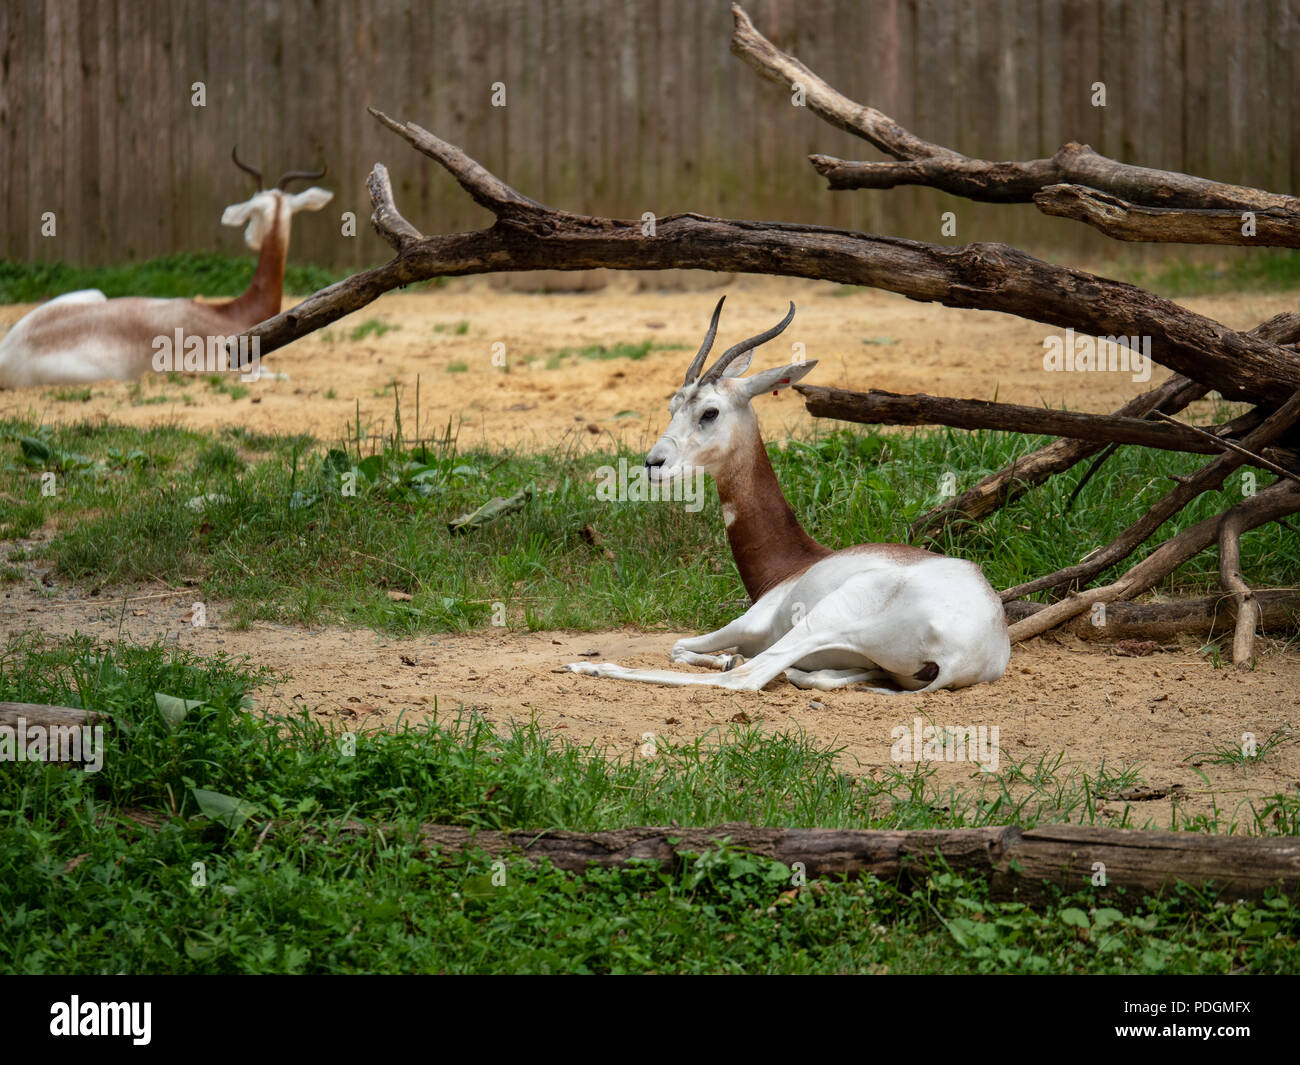 Critically endangered dama gazelle nager dama rests in a zoo enclosure  Stock Photo